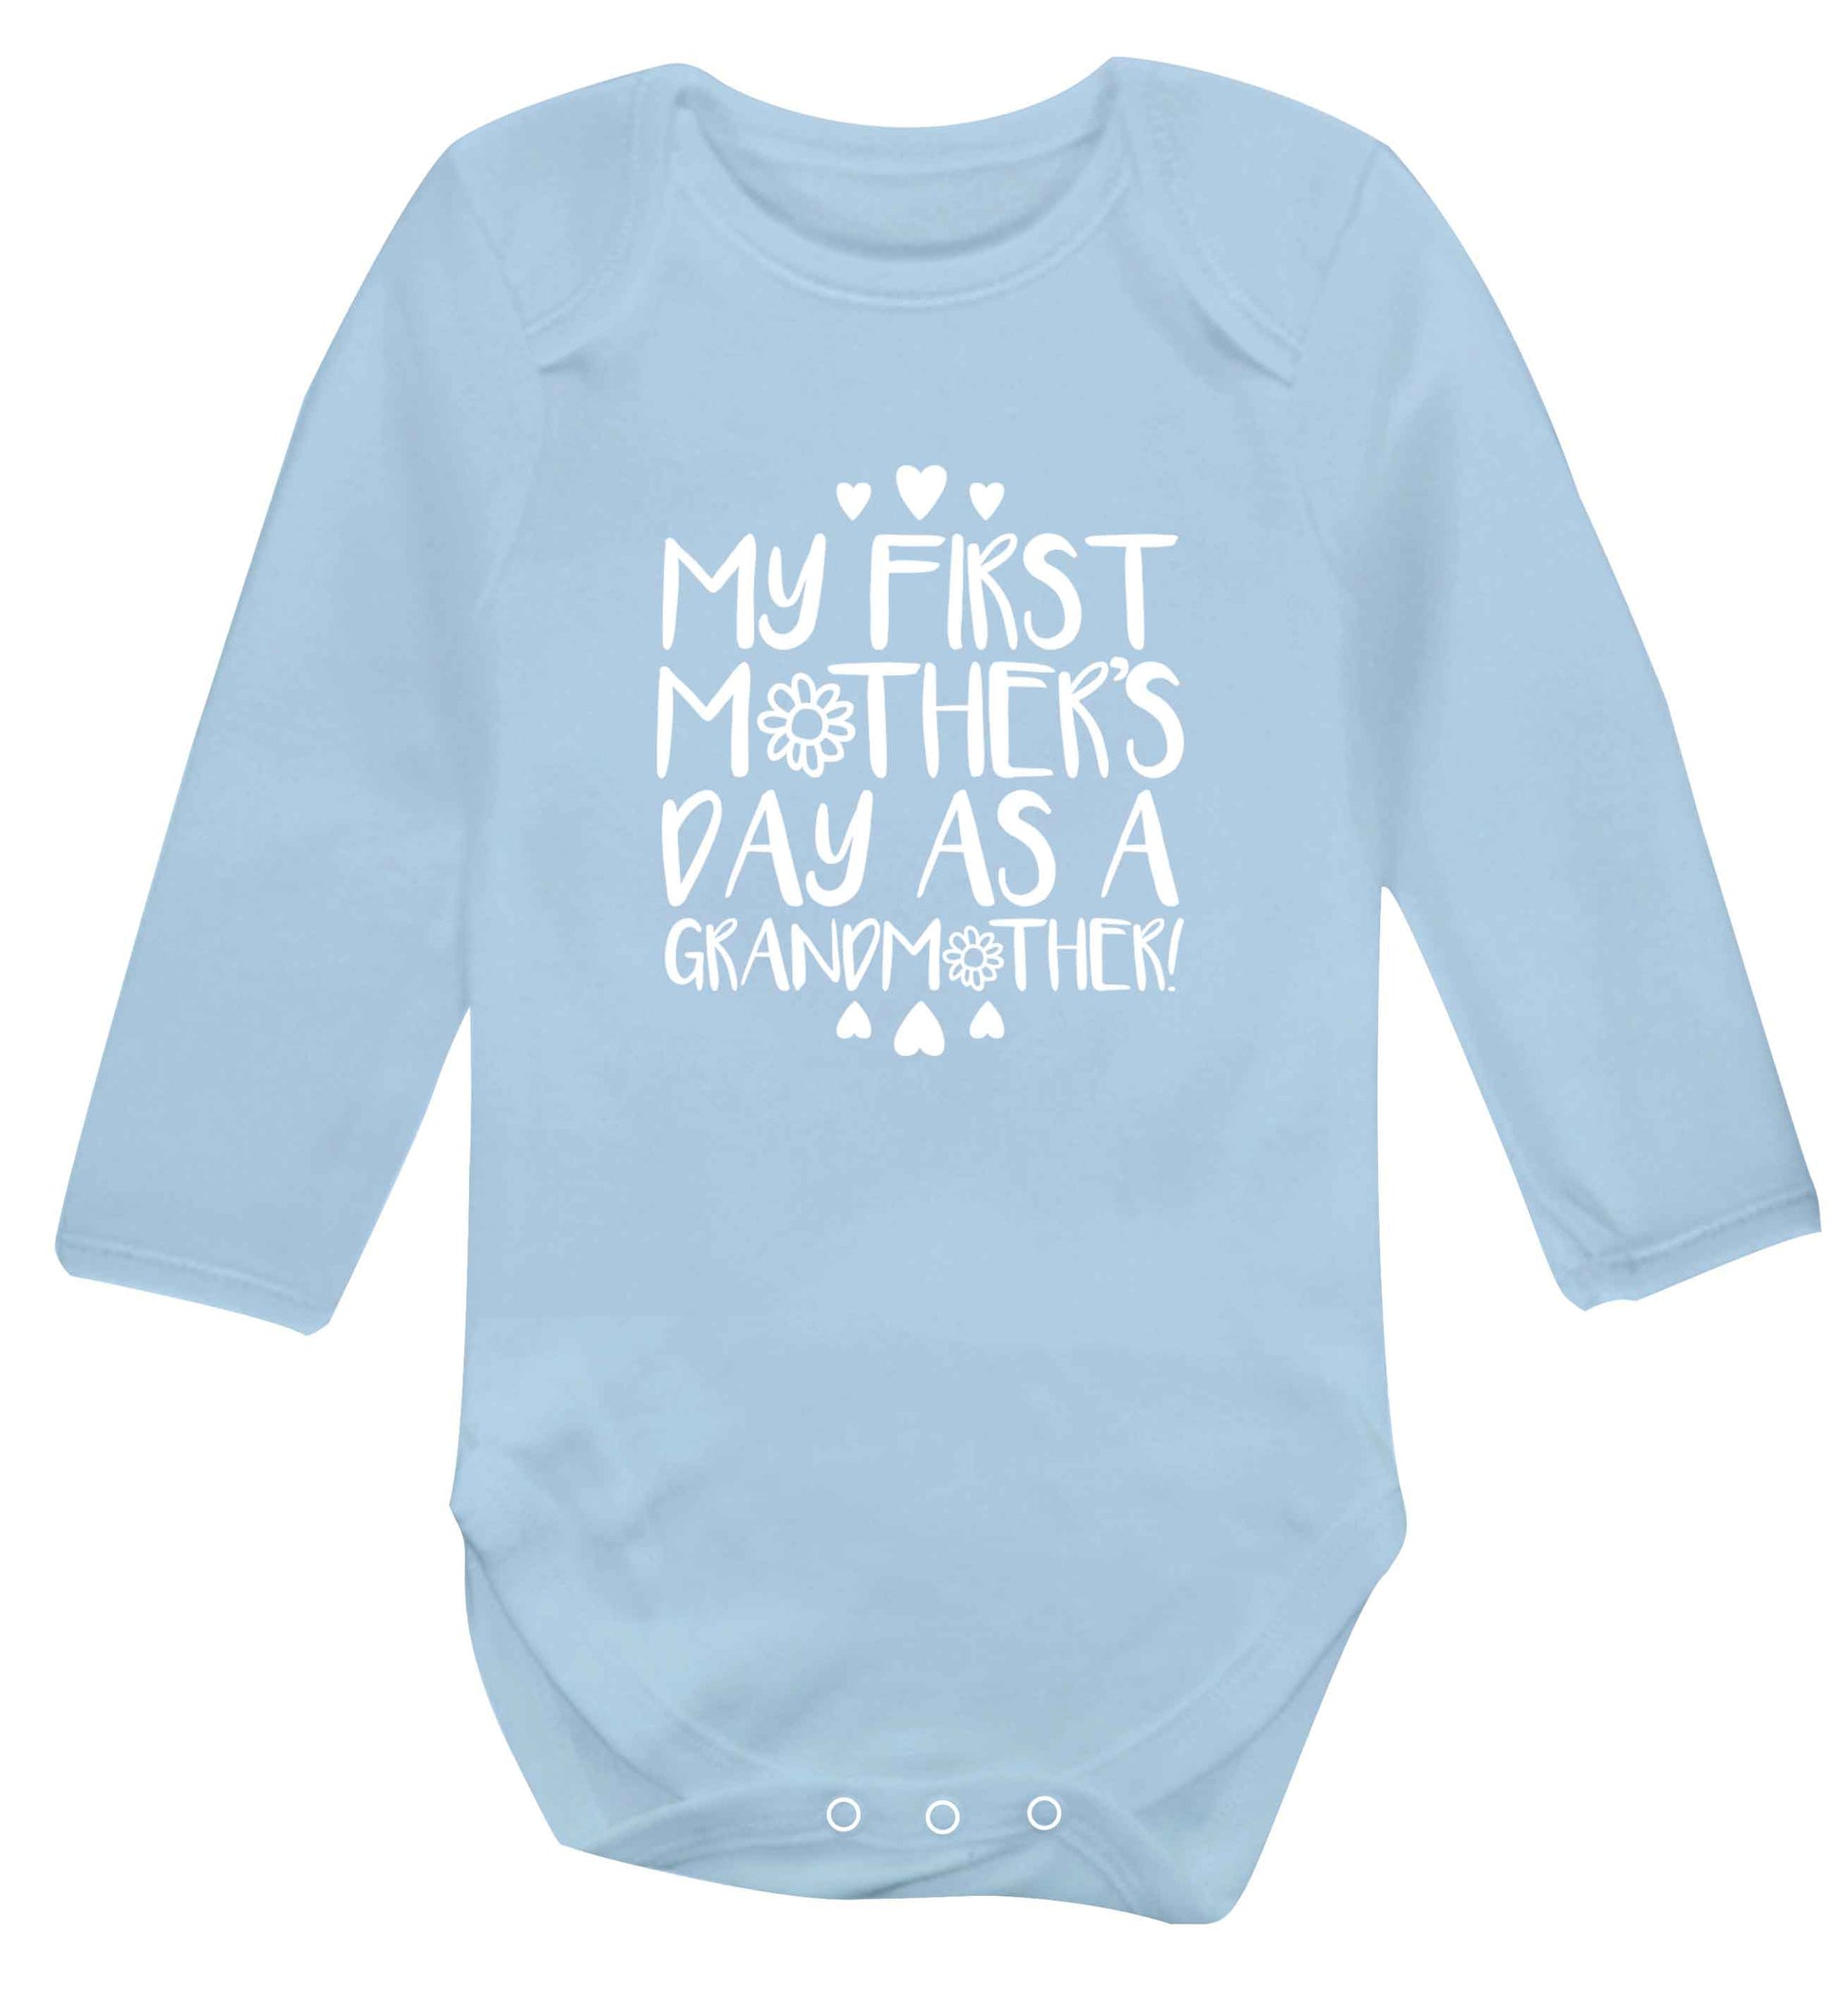 It's my first mother's day as a grandmother baby vest long sleeved pale blue 6-12 months